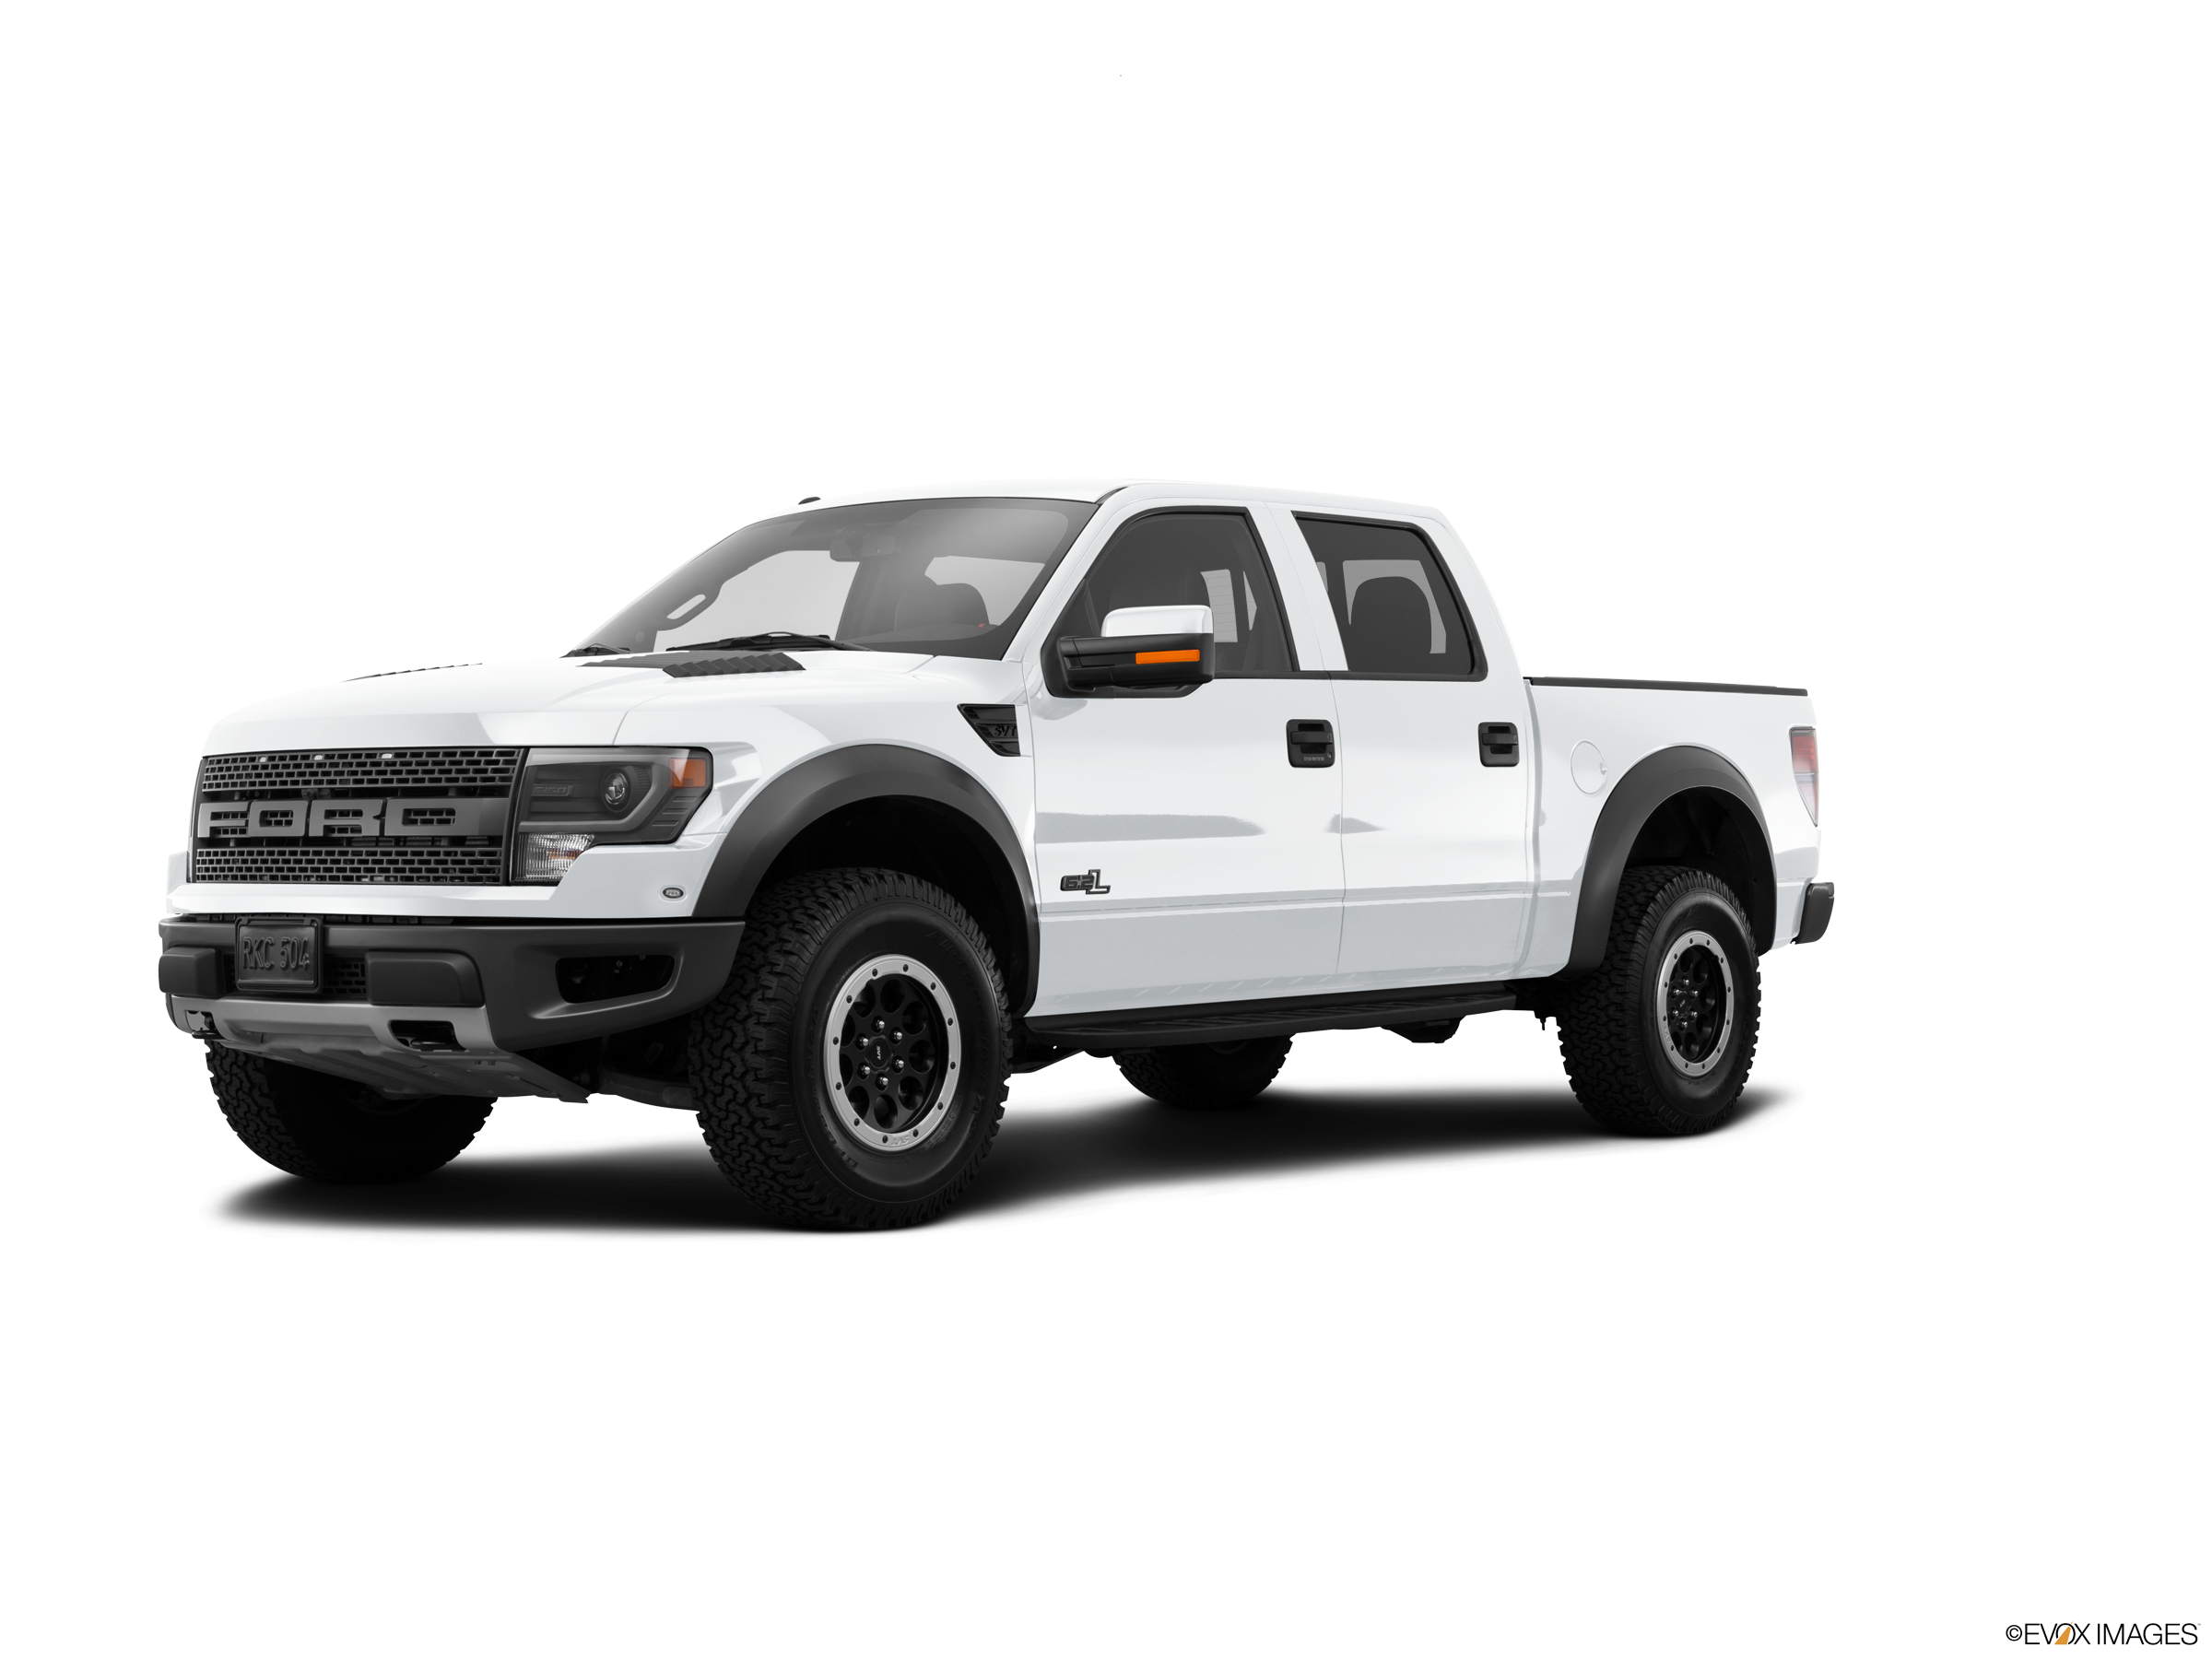 Recall Alert: Ford Raptor Wheels Could Fall Off - Kelley Blue Book